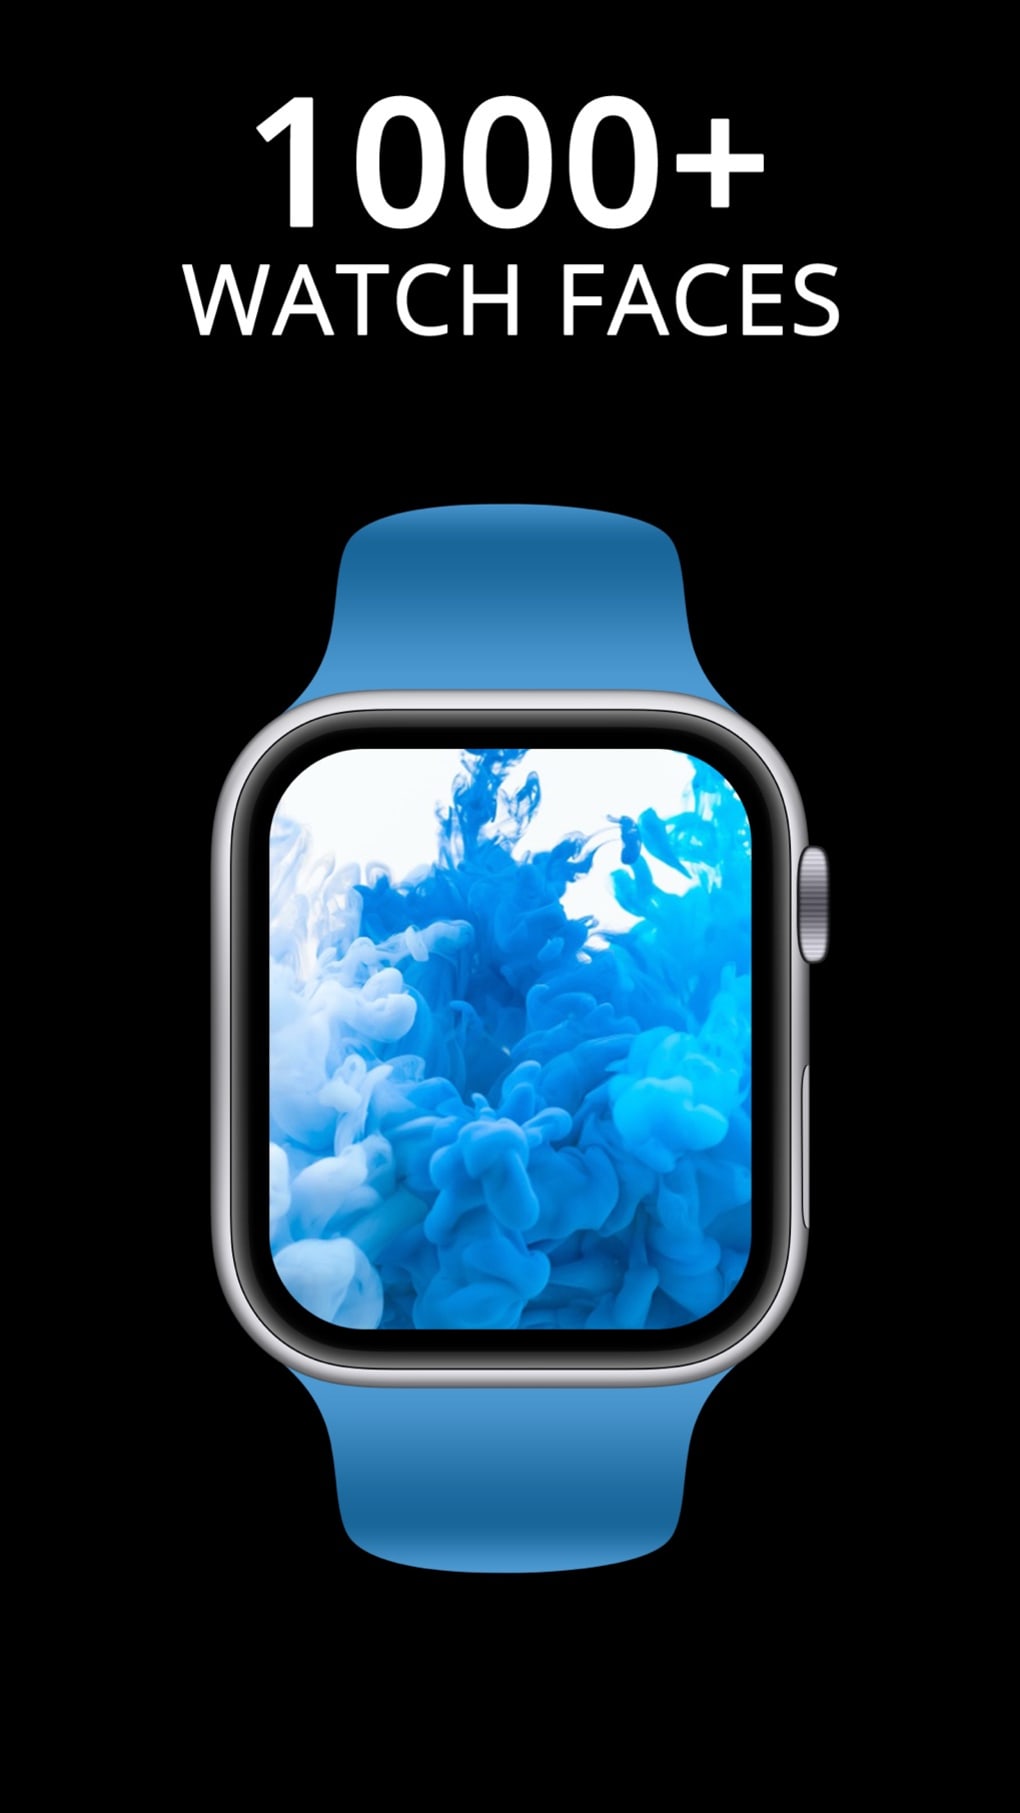 Watch Faces Wallpapers cho iPhone - Tải về